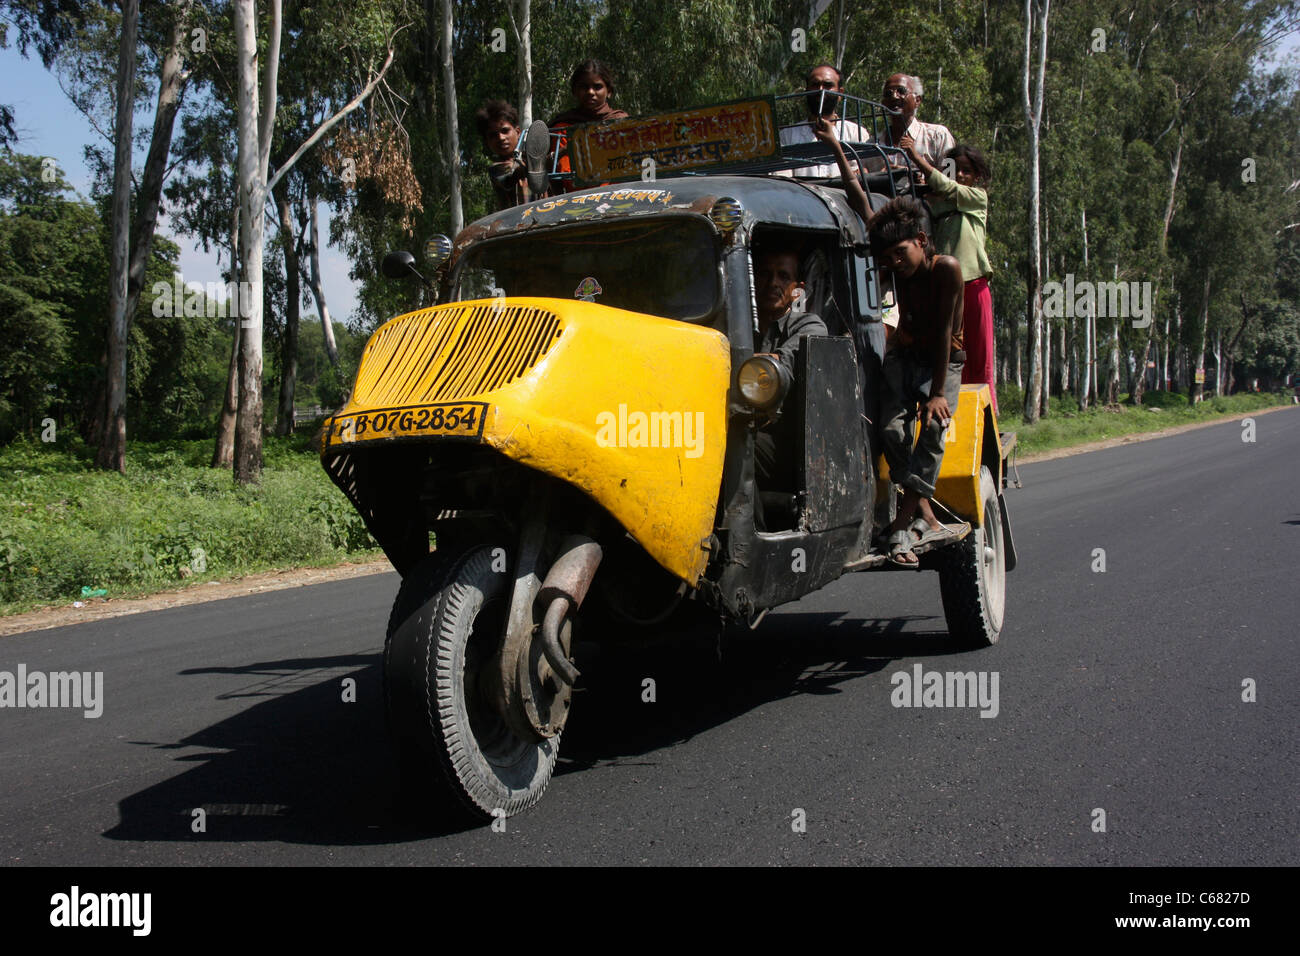 Passengers cling to an Indian Tempo three wheeler taxi bus in the Punjab India Stock Photo